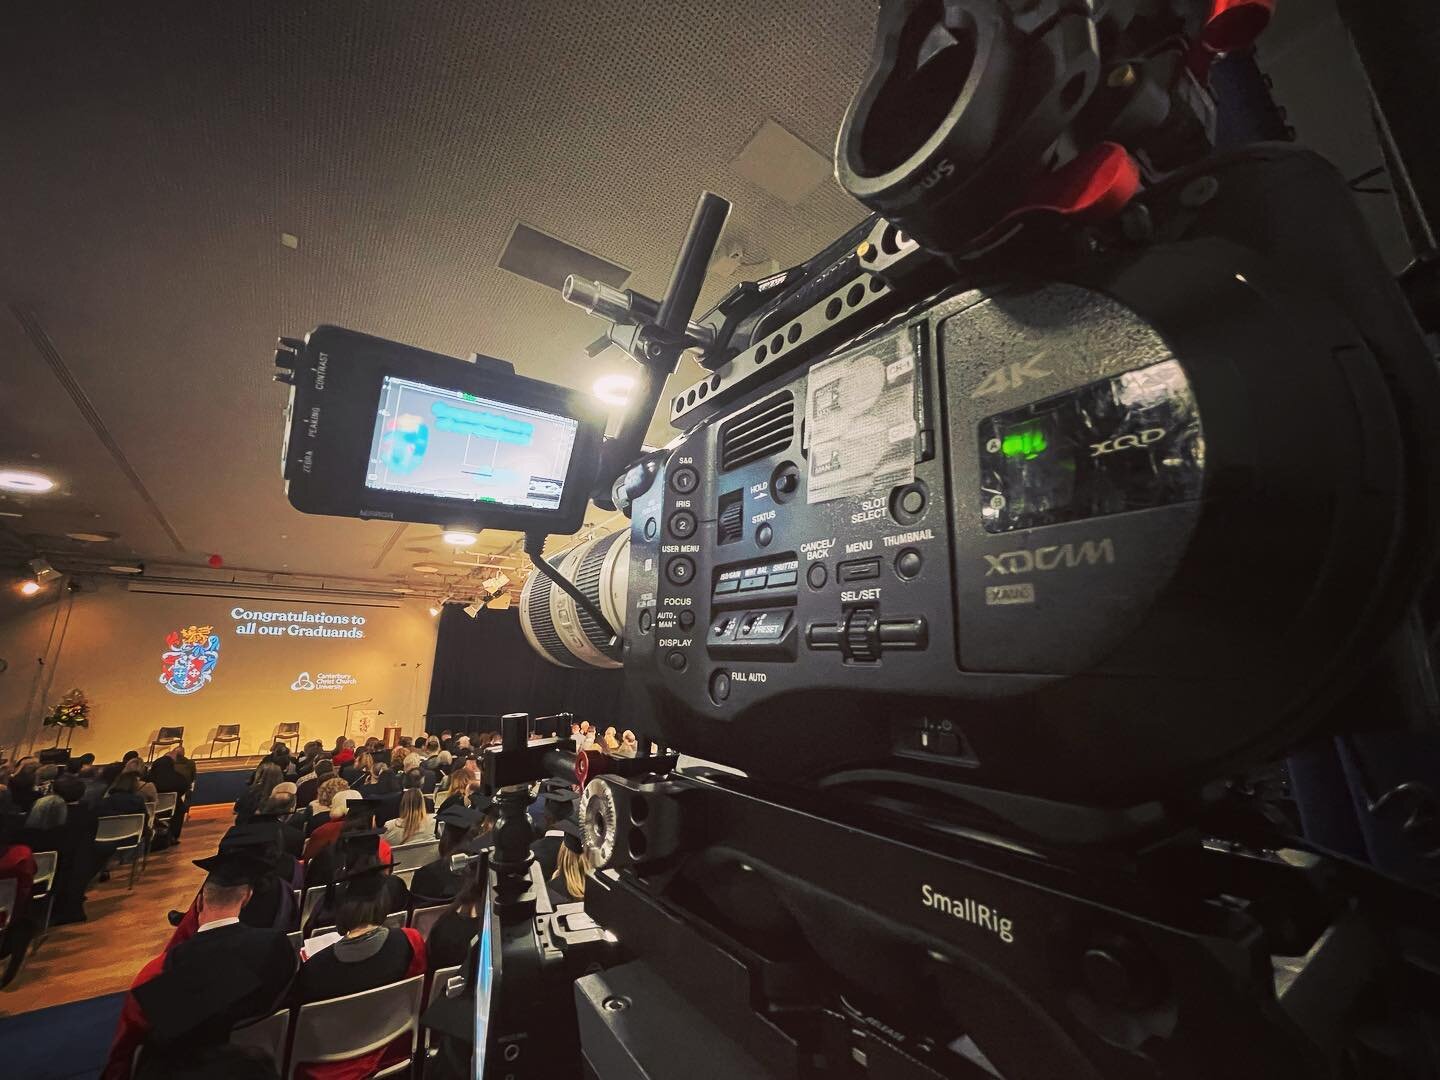 Always a pleasure to return to my old uni (only 18yrs after I started!) to livestream some graduations! #cccu #livestream #cameras #fs7 #freelancecameraman #feelingold